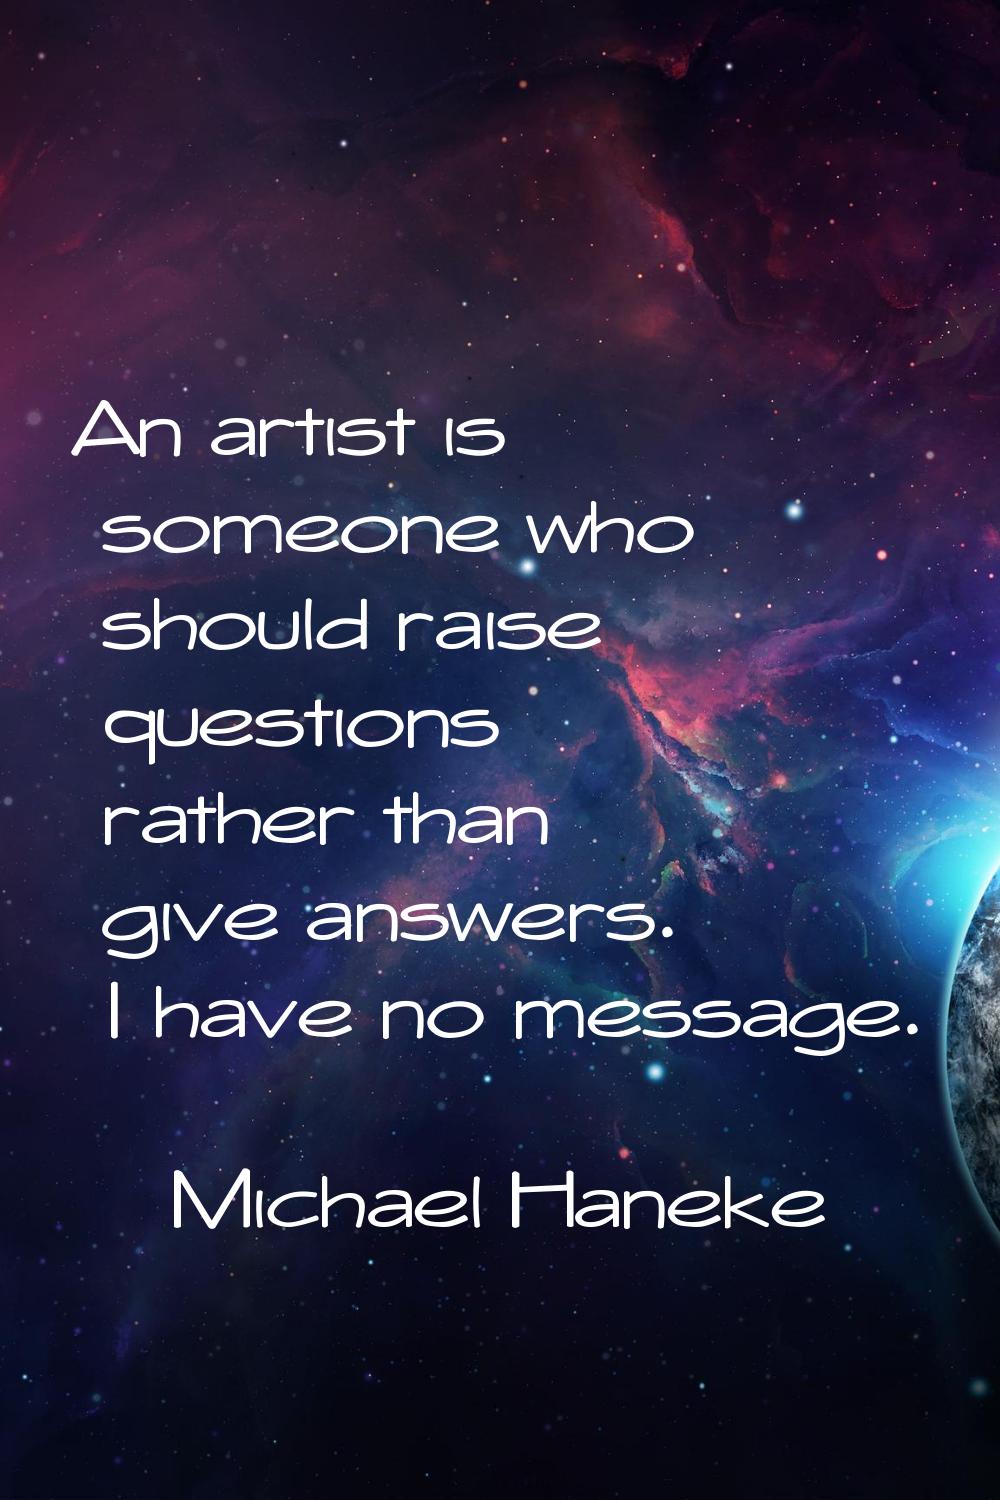 An artist is someone who should raise questions rather than give answers. I have no message.